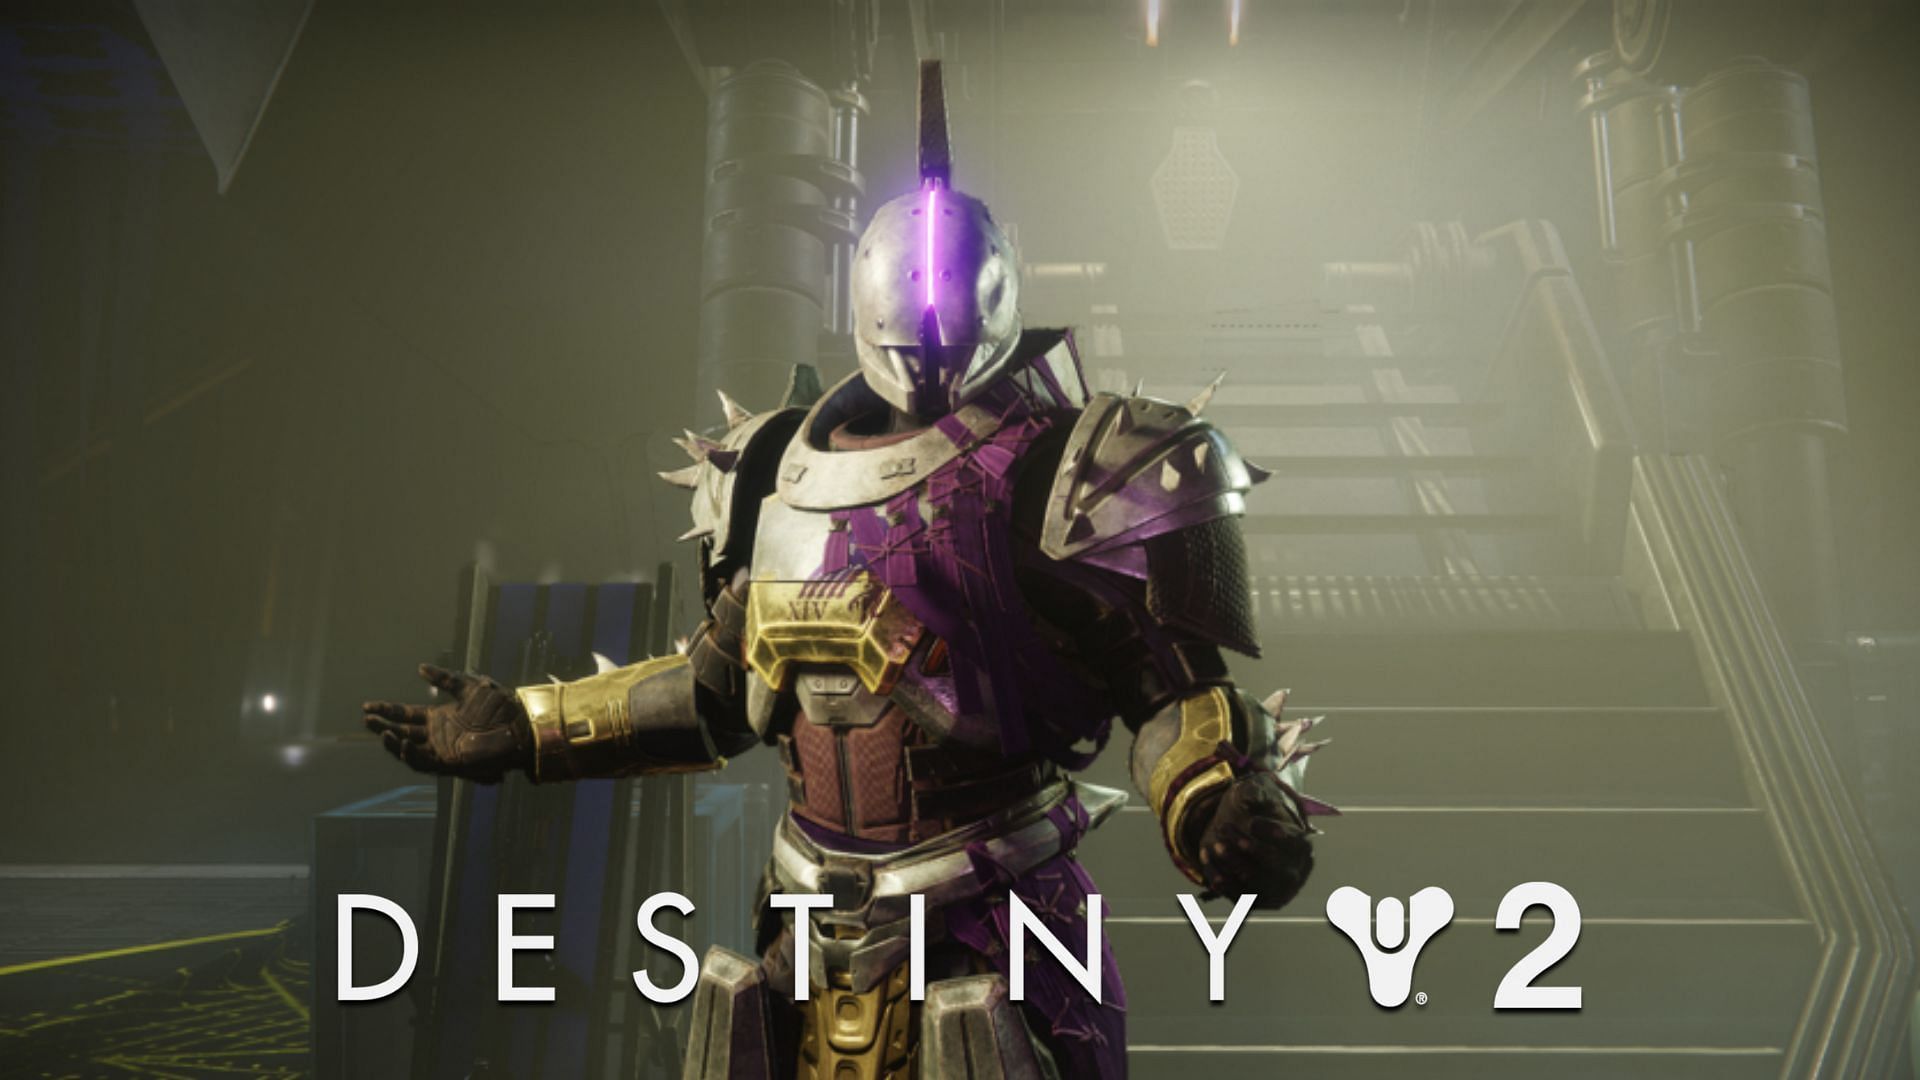 Saint-14 is a formidable Lightbearer in the franchise (Image via Bungie)